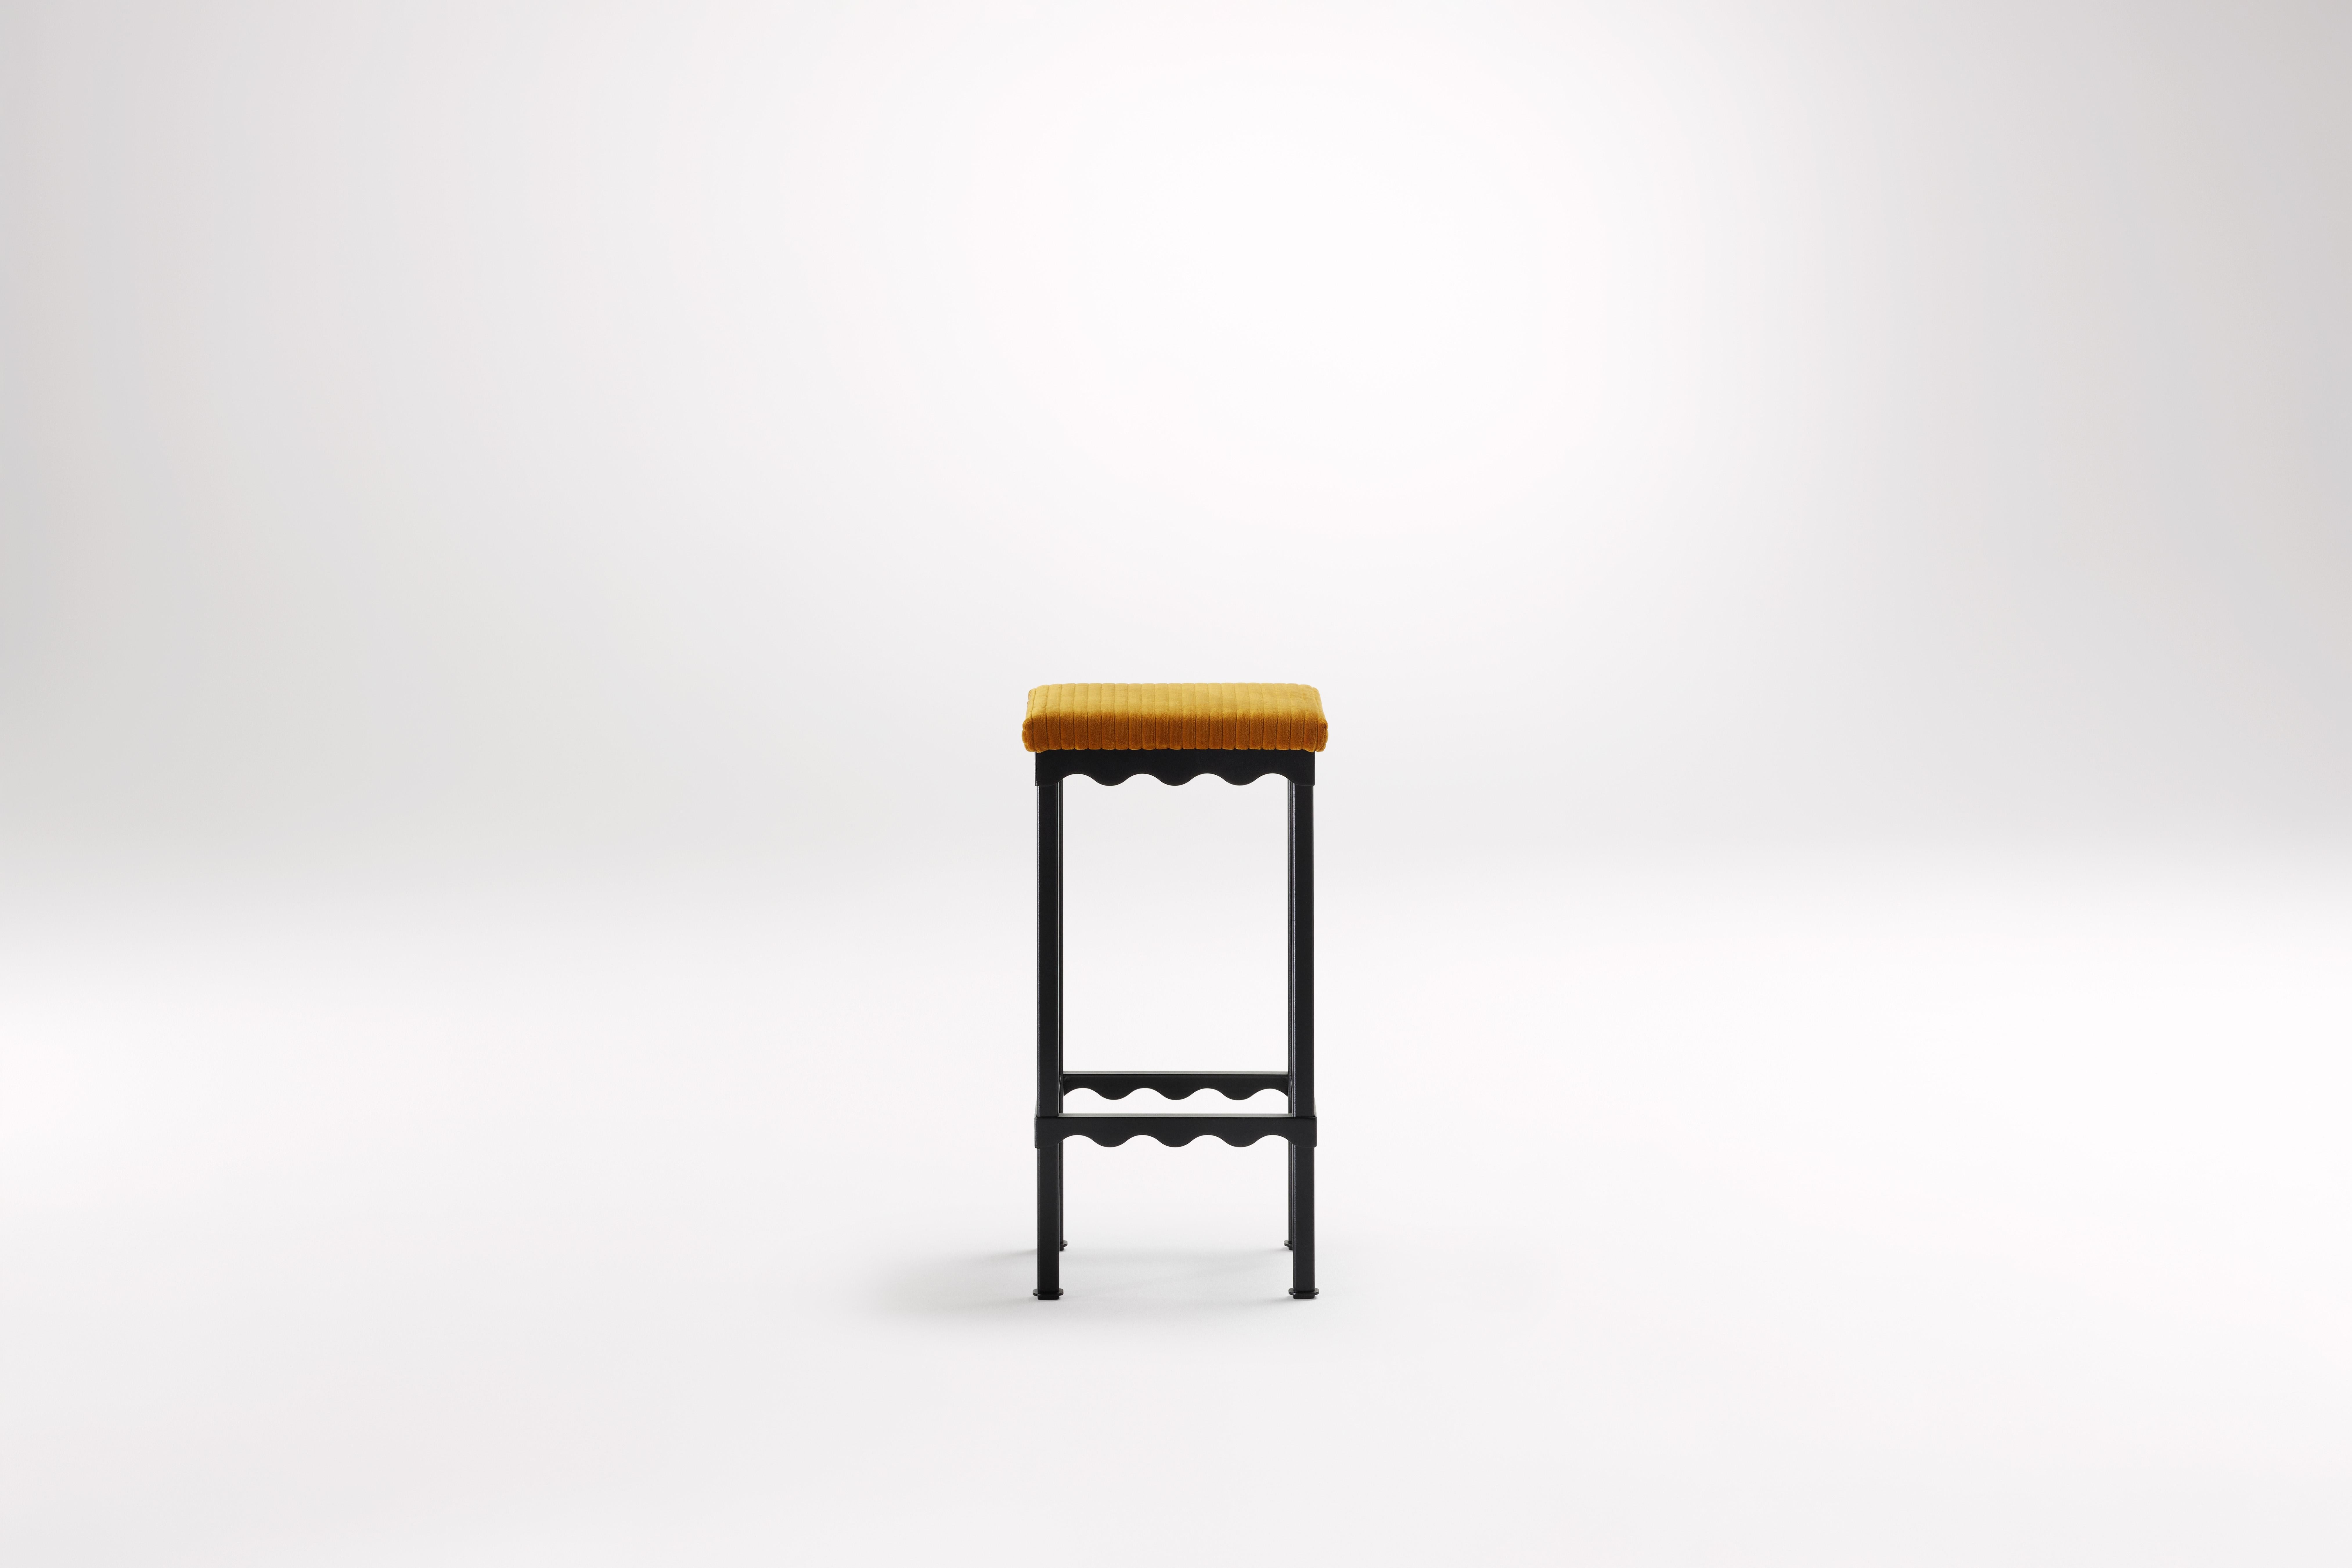 Mikado Bellini High Stool by Coco Flip
Dimensions: D 34 x W 34 x H 65/75 cm
Materials: Timber / Stone tops, Powder-coated steel frame. 
Weight: 8kg
Frame Finishes: Textura Black.

Coco Flip is a Melbourne based furniture and lighting design studio,